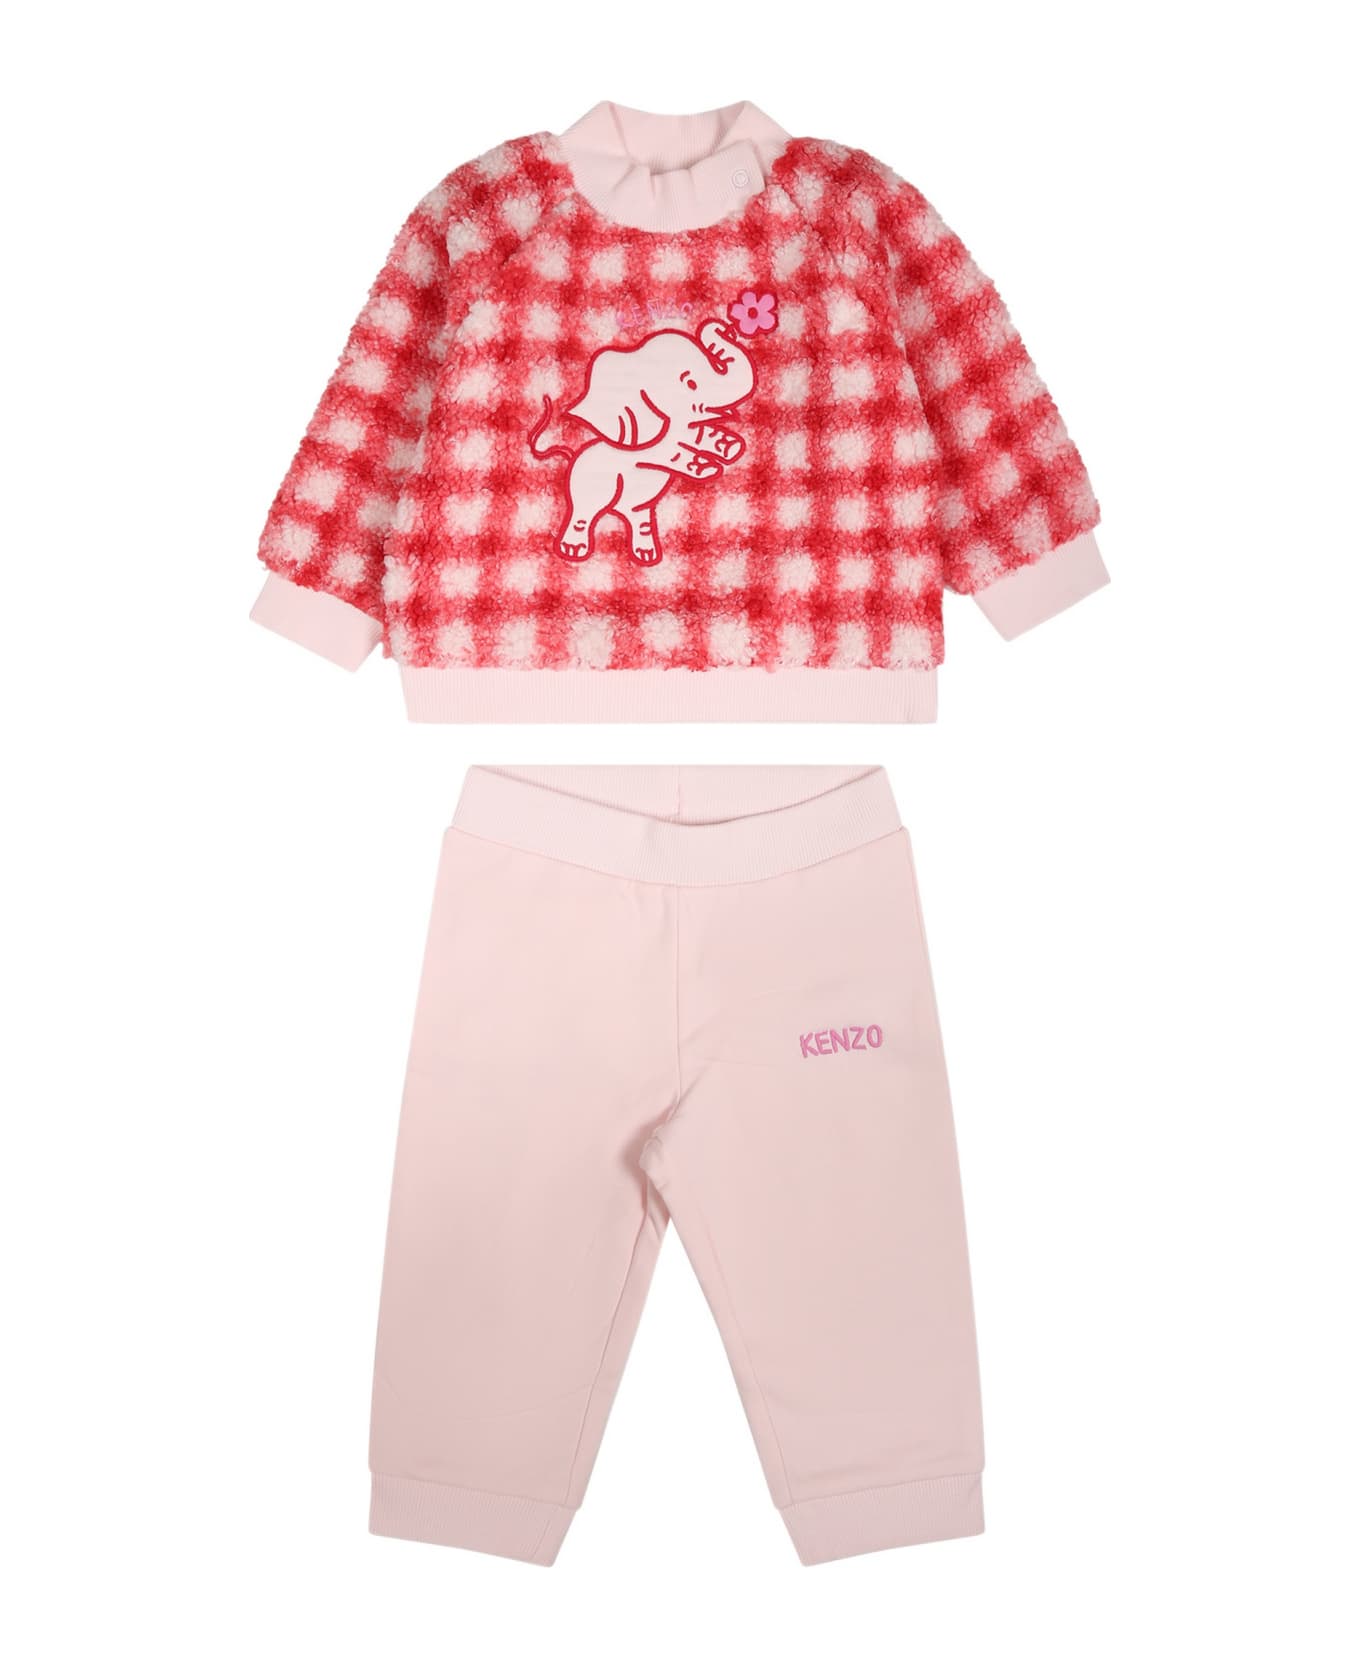 Kenzo Kids Red Suit For Baby Girl With Elephant - Multicolor